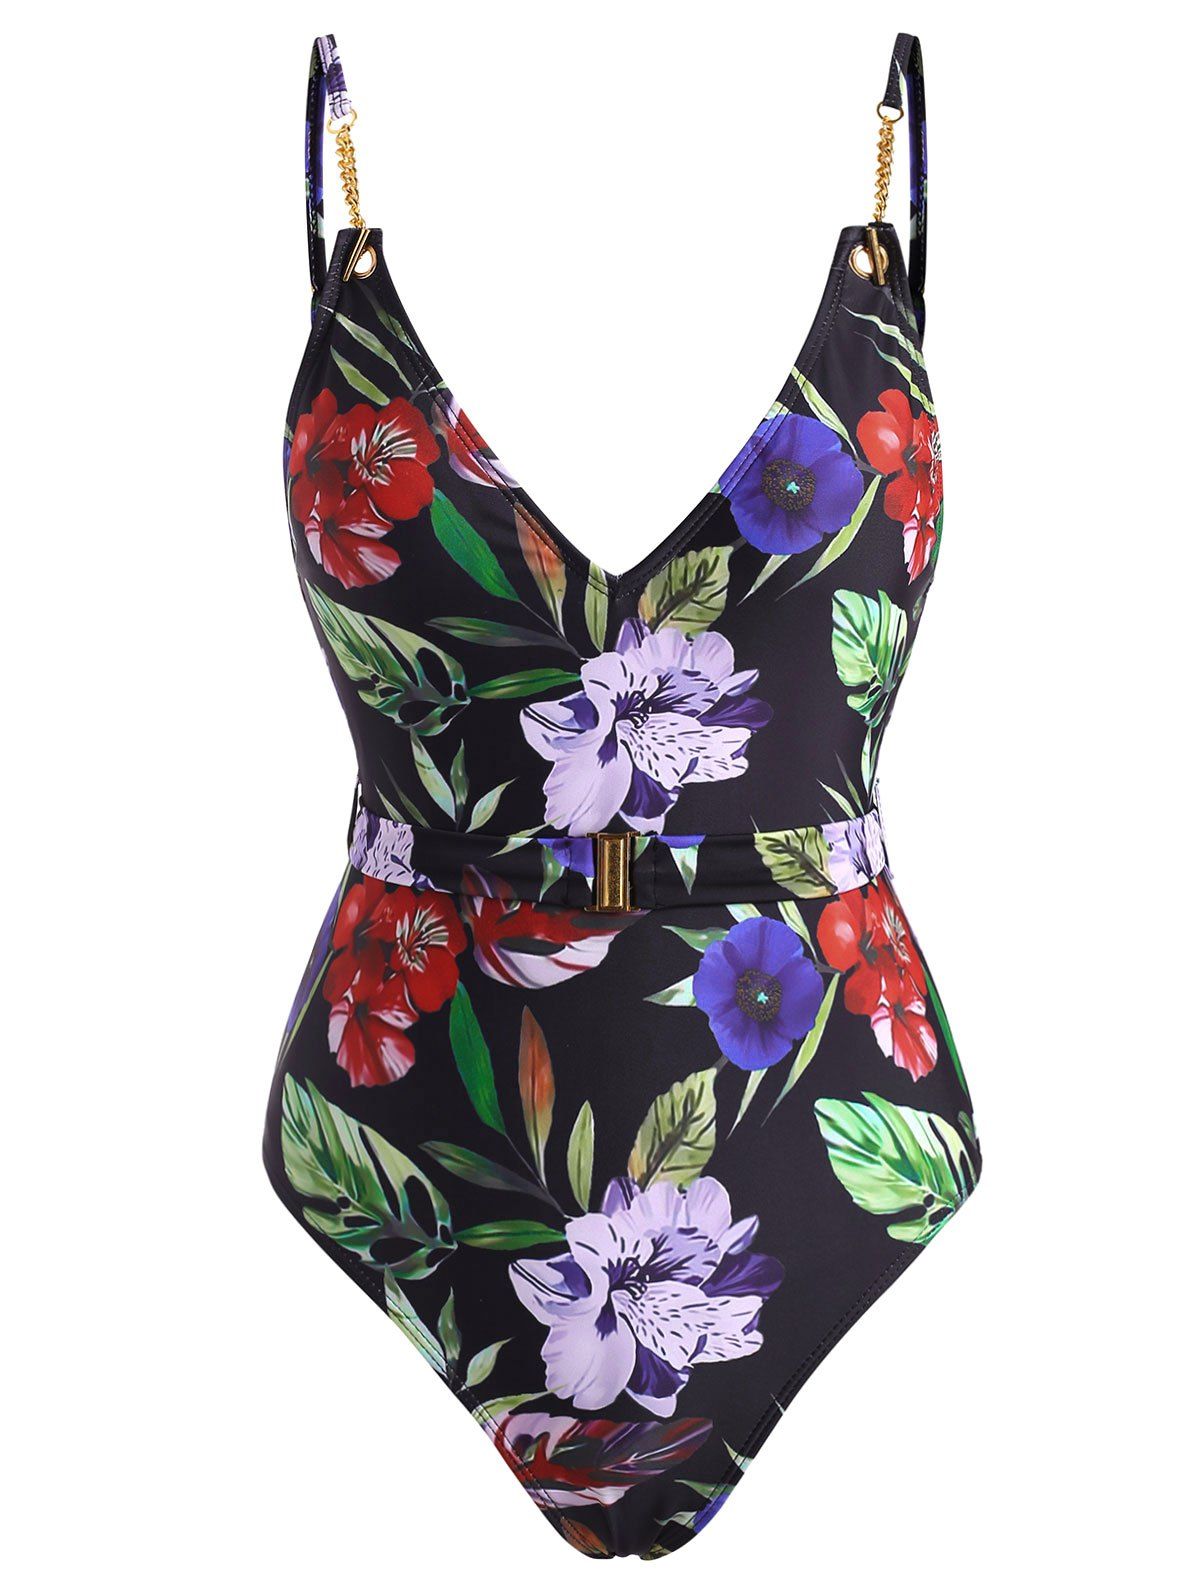 Flower Print Chain Embellished Belted One-piece Swimsuit - BLACK L